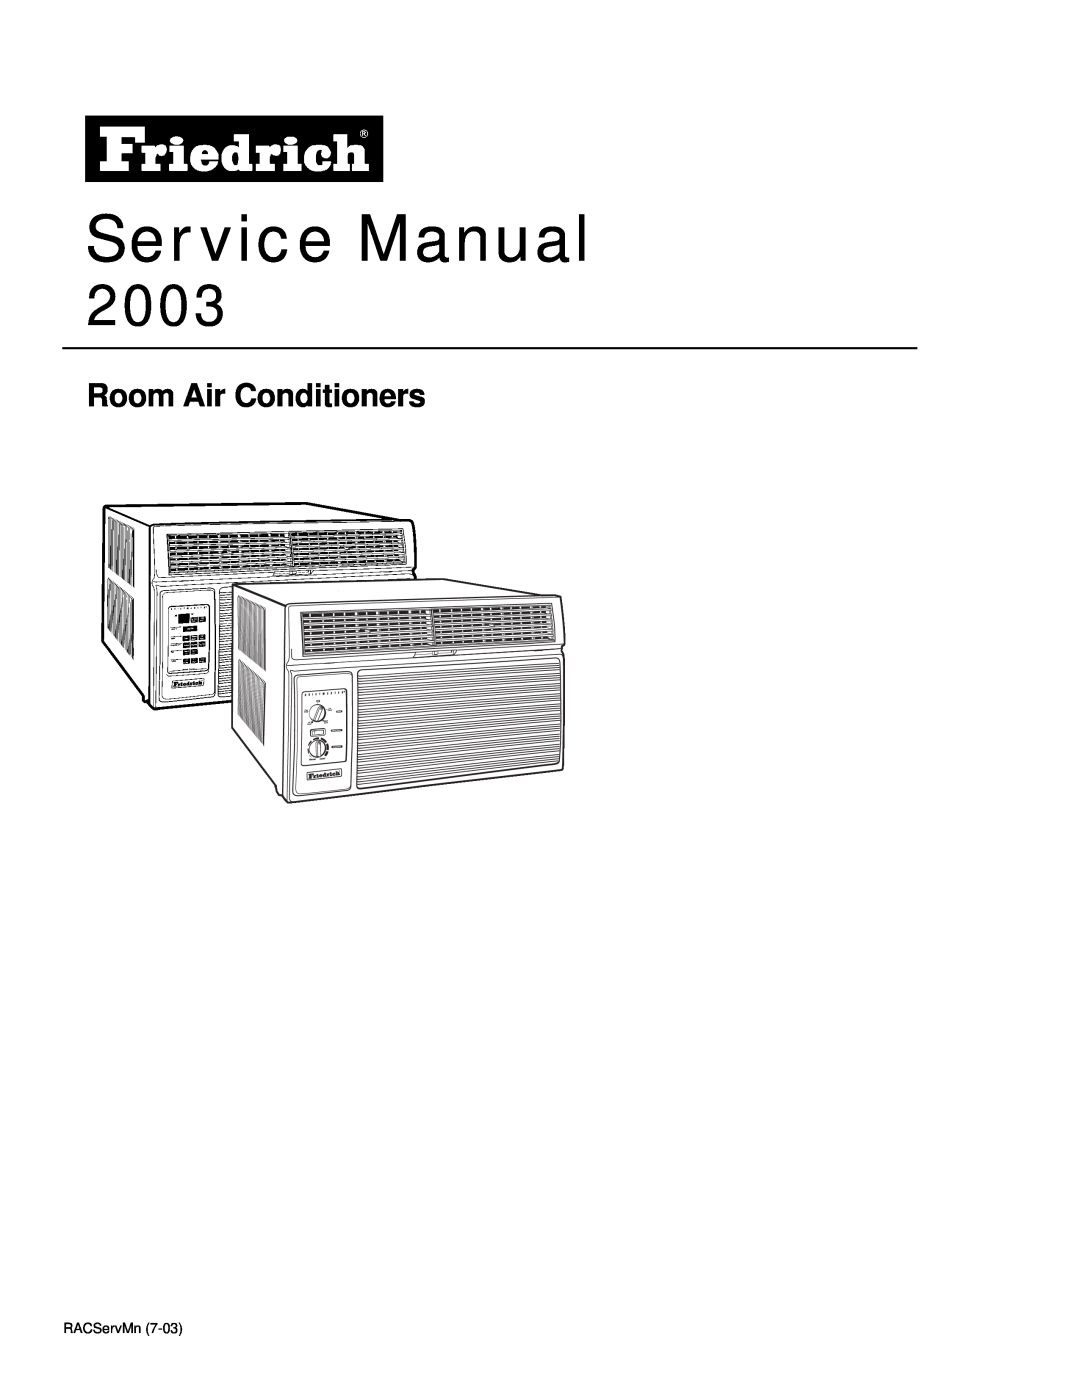 Friedrich racservmn service manual Room Air Conditioners, Service Manual, 2003 